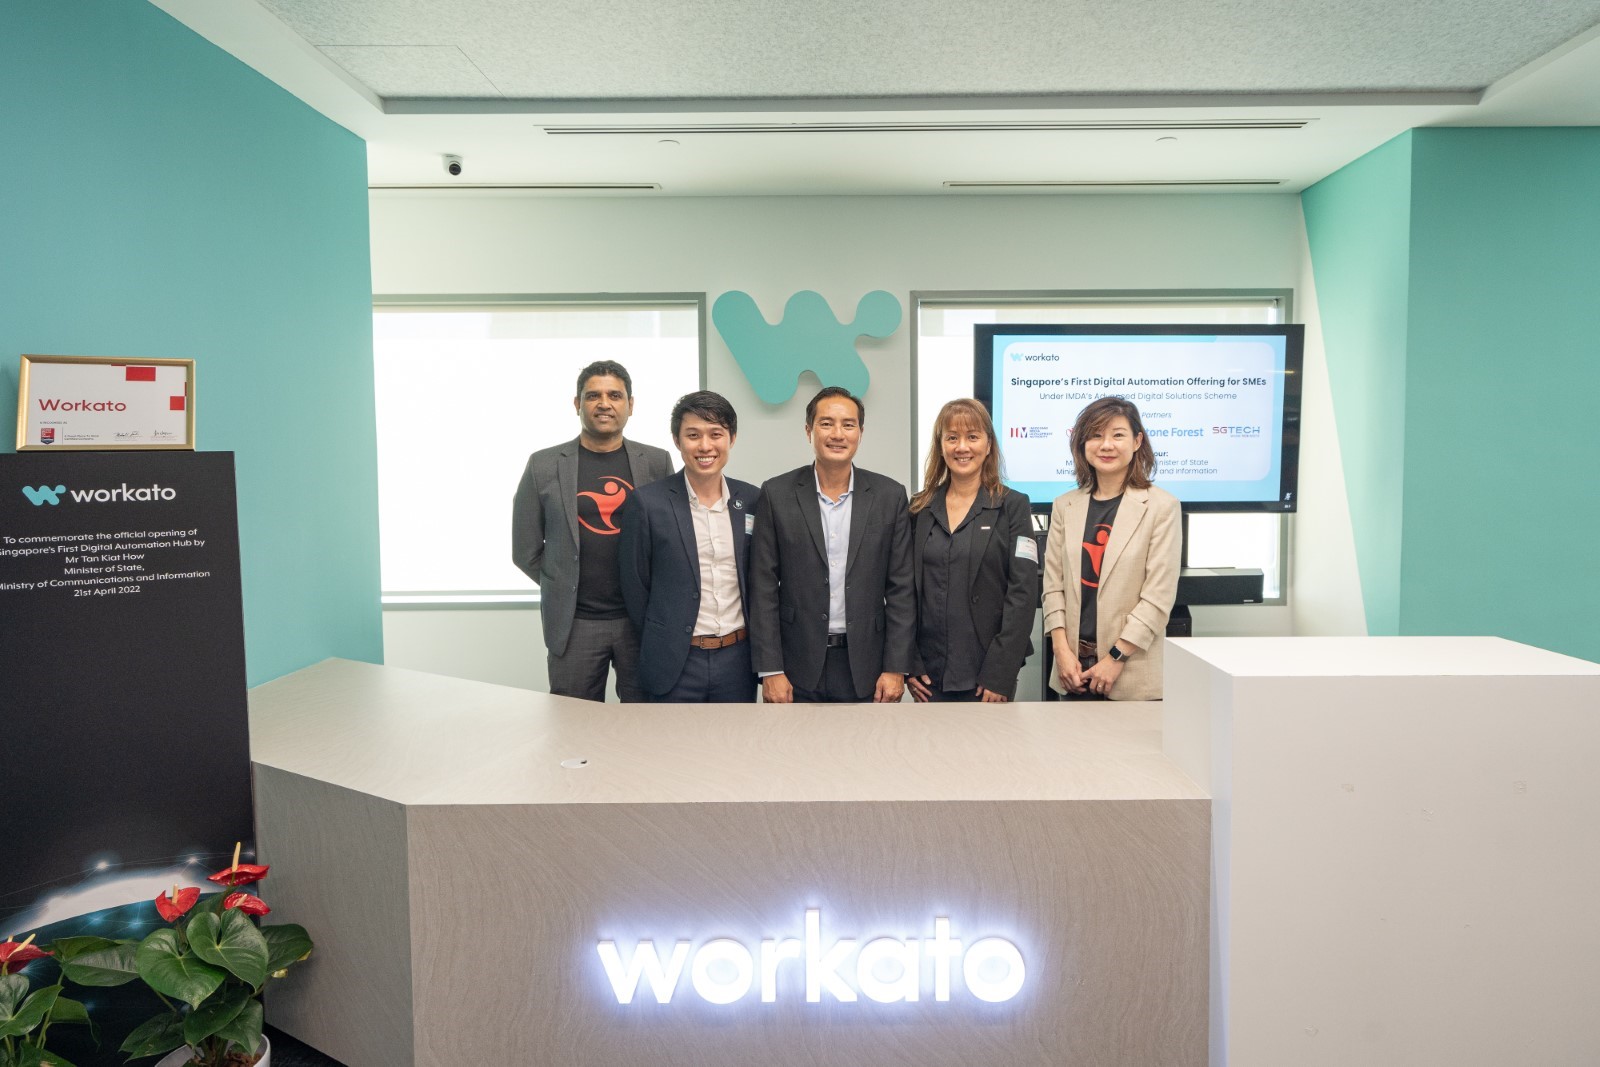 Workato aims to onboard 1,500 SMEs with Singapore’s first digital automation offering under IMDA’s Advanced Digital Solutions scheme